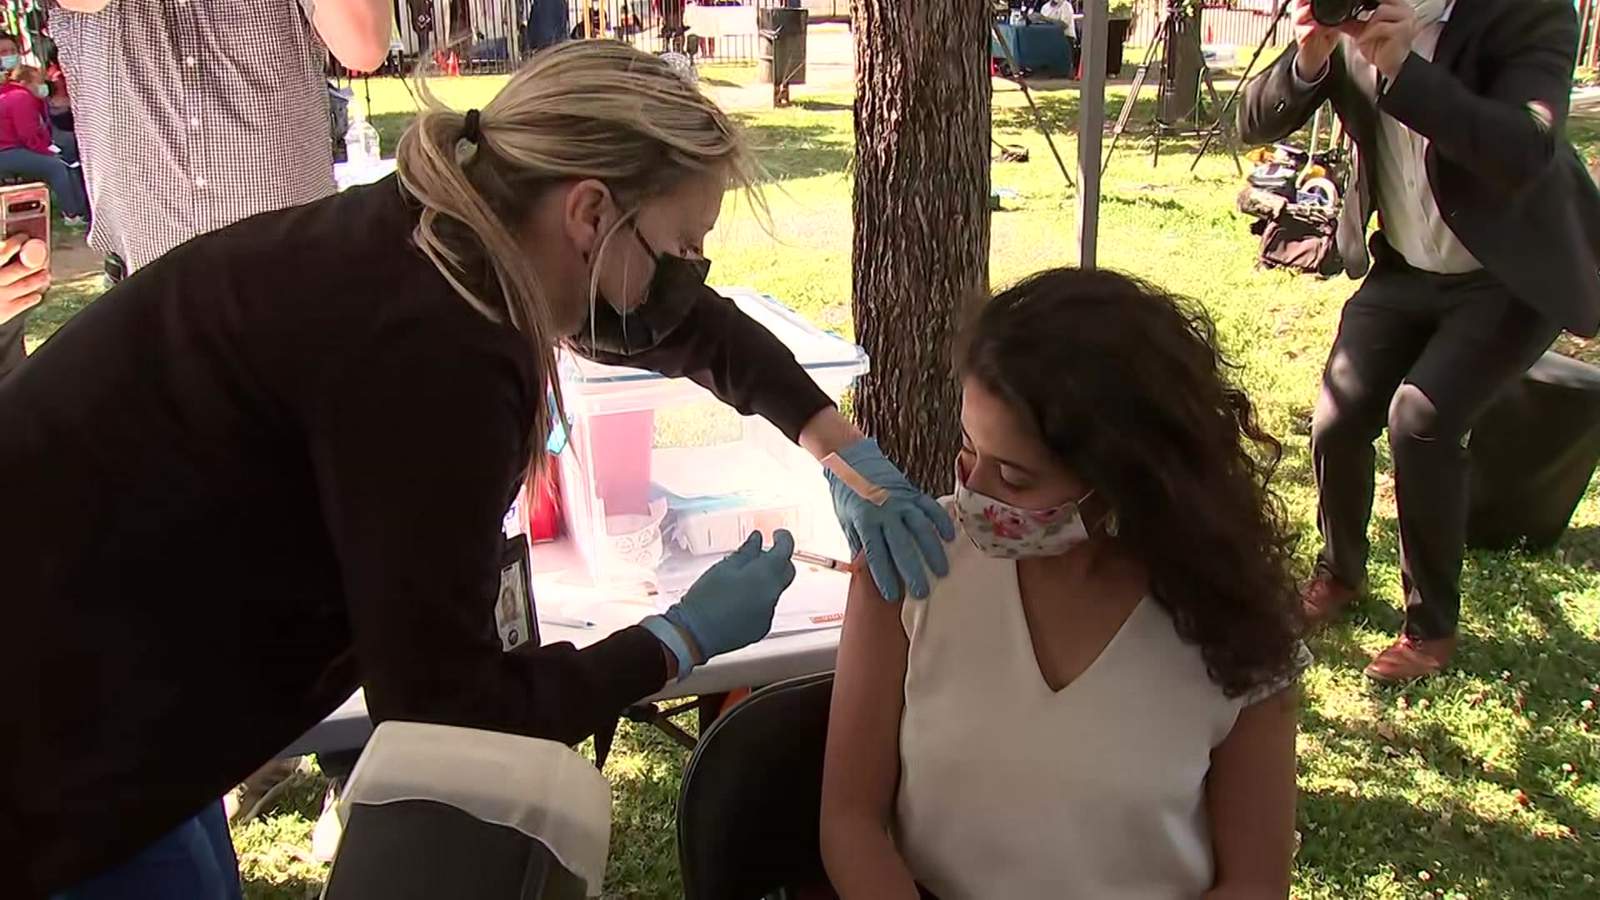 Hidalgo gets her coronavirus shot, encourages others to do the same